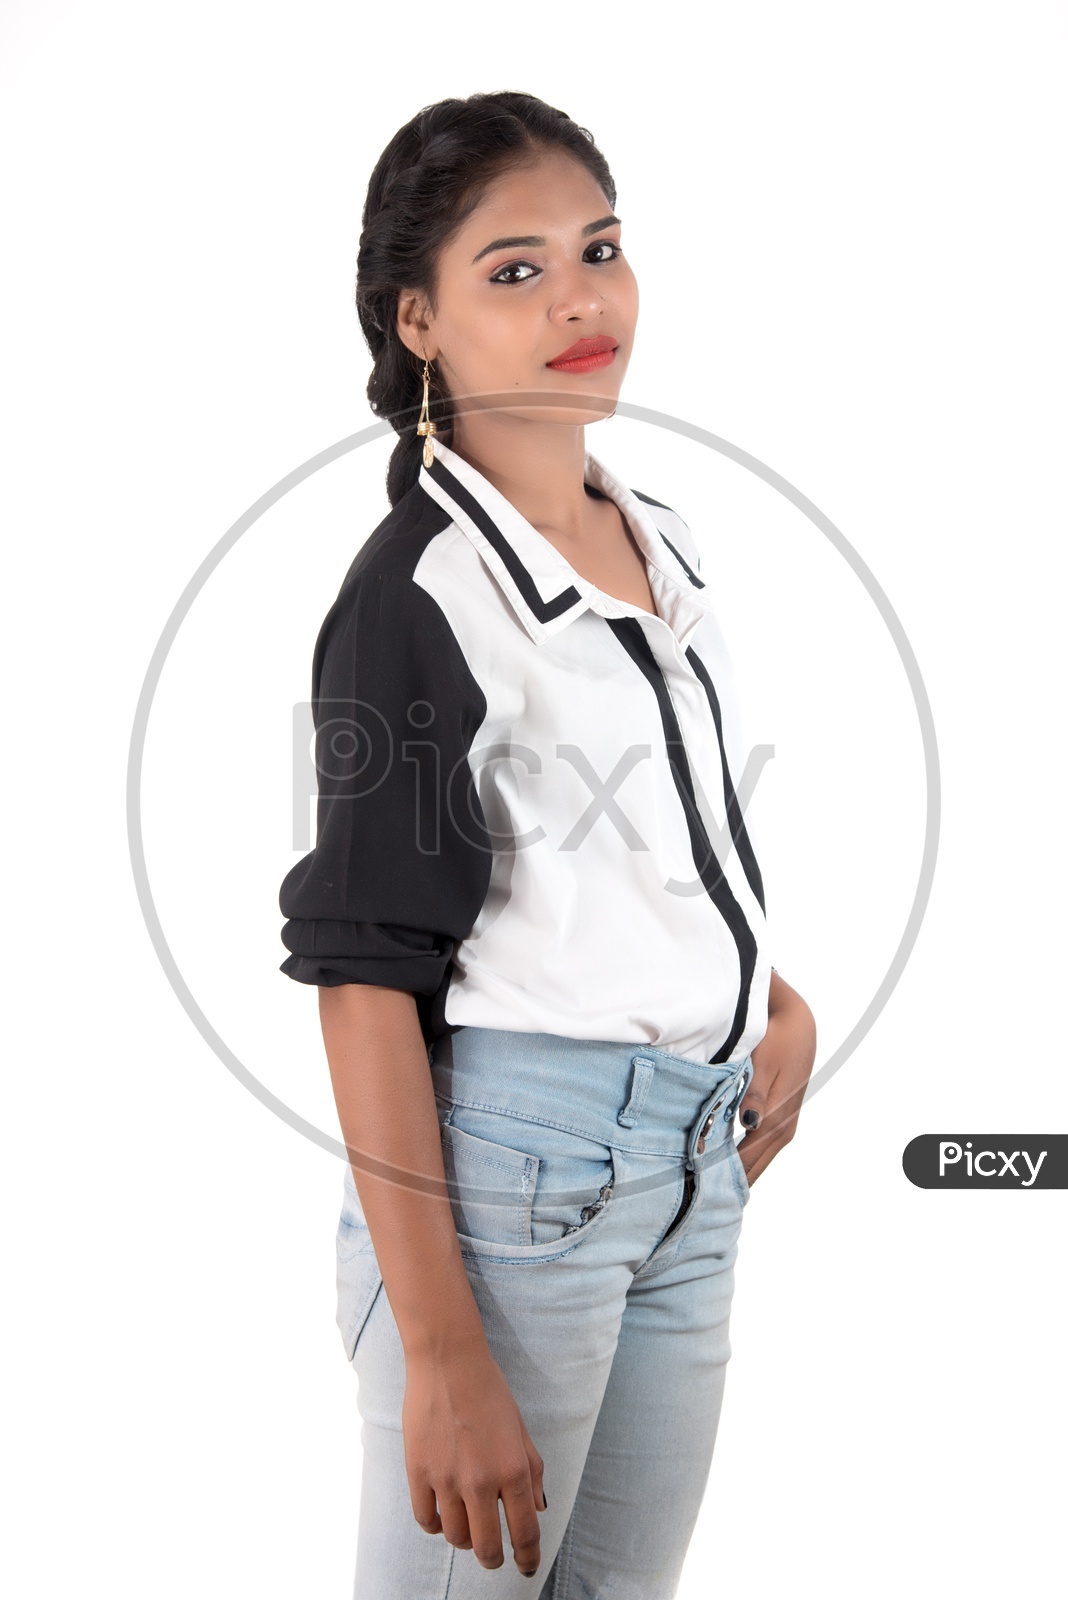 Portrait Of a Young Girl Posing On an Isolated White Background